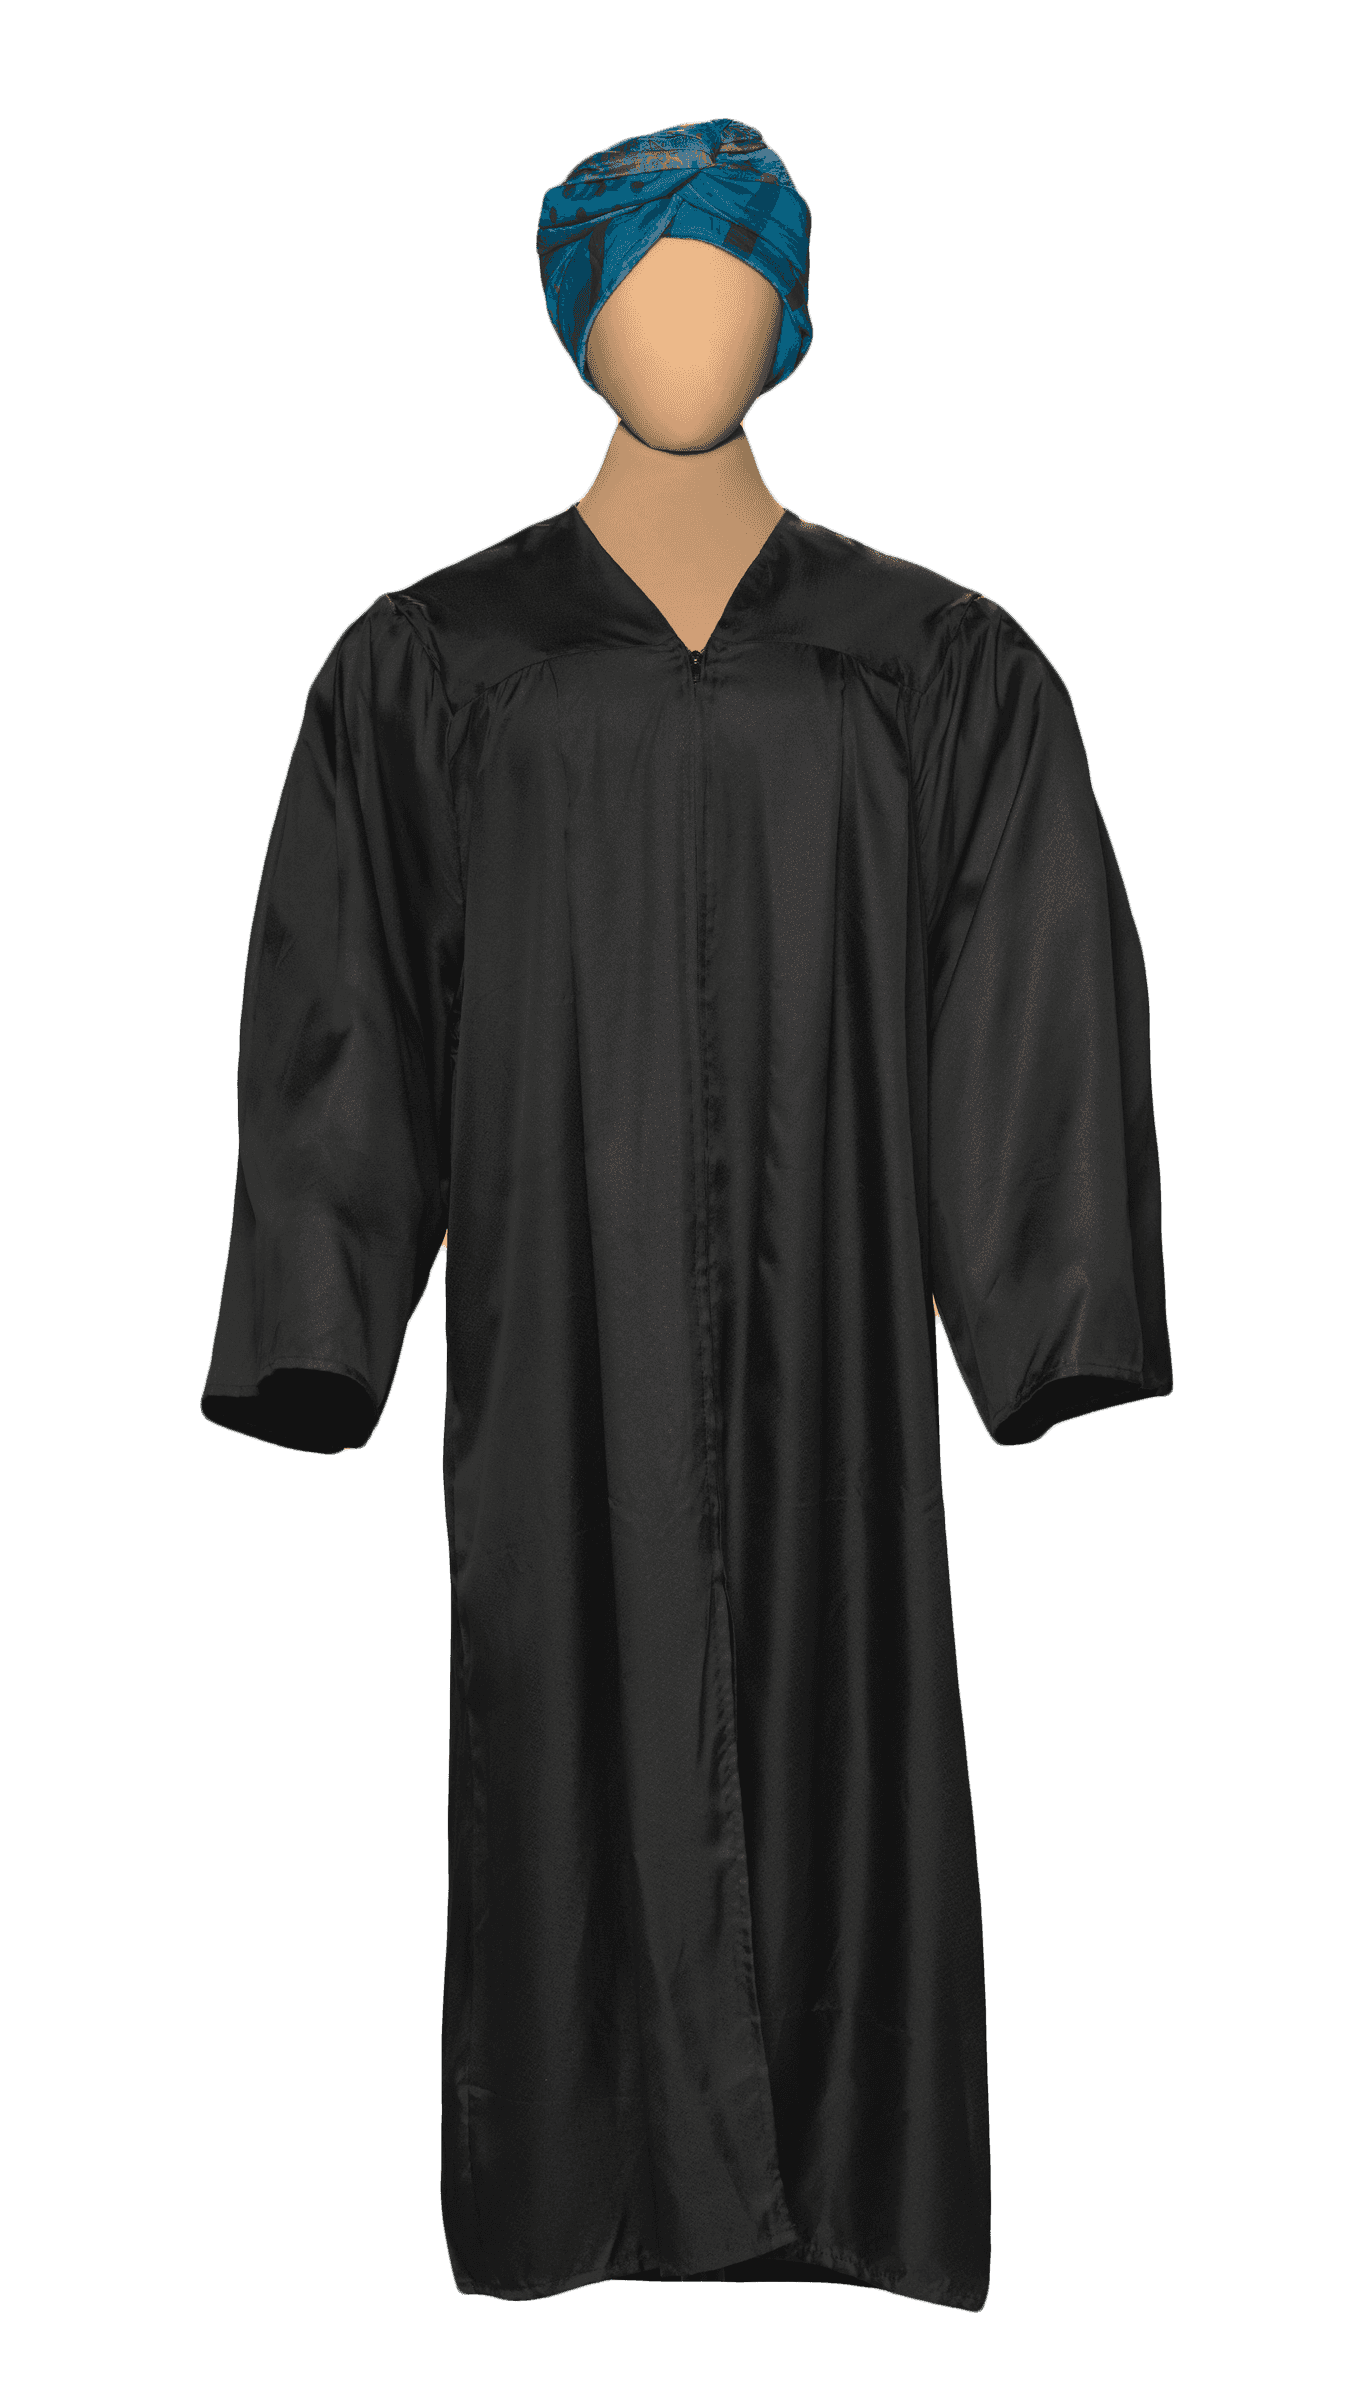 A black robe worn at convocation with a headwrap. The robe has a zipper down the front.